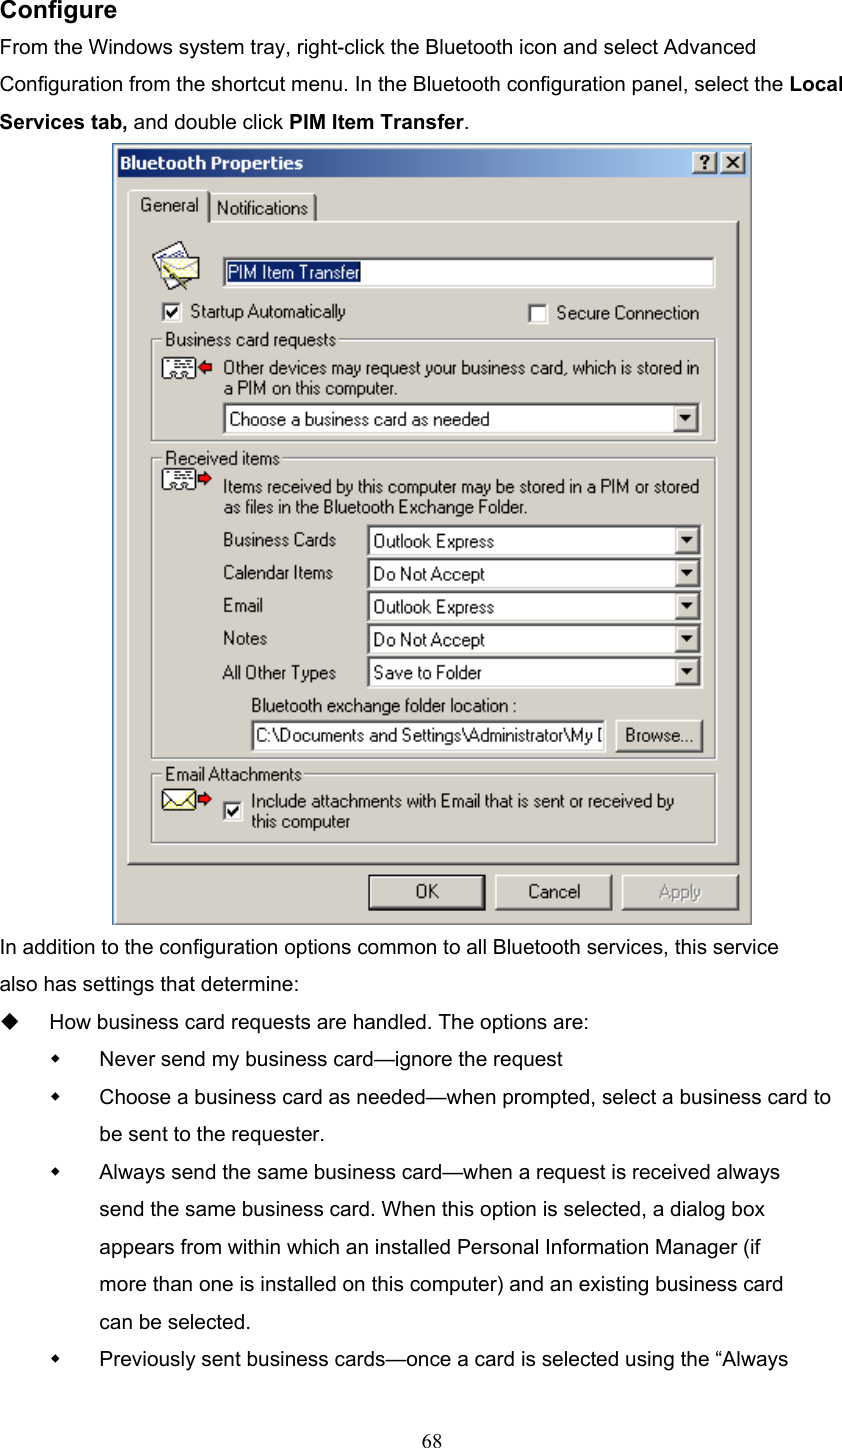  68  Configure From the Windows system tray, right-click the Bluetooth icon and select Advanced Configuration from the shortcut menu. In the Bluetooth configuration panel, select the Local Services tab, and double click PIM Item Transfer.  In addition to the configuration options common to all Bluetooth services, this service also has settings that determine:   How business card requests are handled. The options are:   Never send my business card—ignore the request   Choose a business card as needed—when prompted, select a business card to be sent to the requester.   Always send the same business card—when a request is received always send the same business card. When this option is selected, a dialog box appears from within which an installed Personal Information Manager (if more than one is installed on this computer) and an existing business card can be selected.   Previously sent business cards—once a card is selected using the “Always 